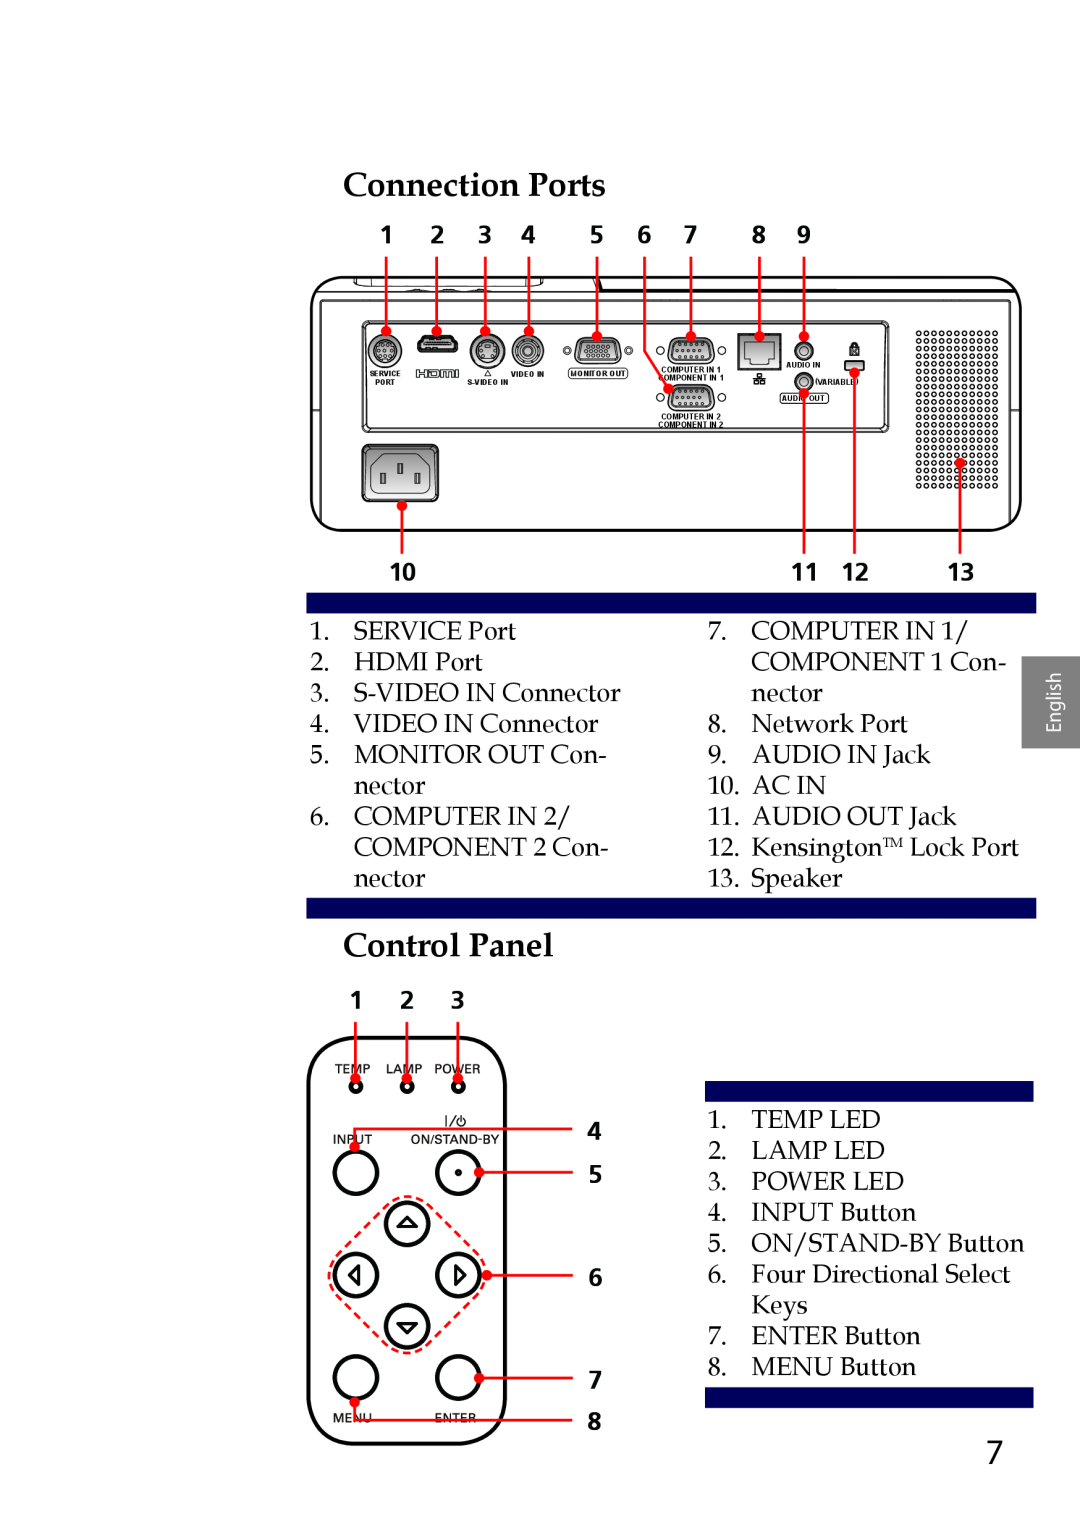 Sanyo PDG-DWL100 owner manual Connection Ports, Control Panel 